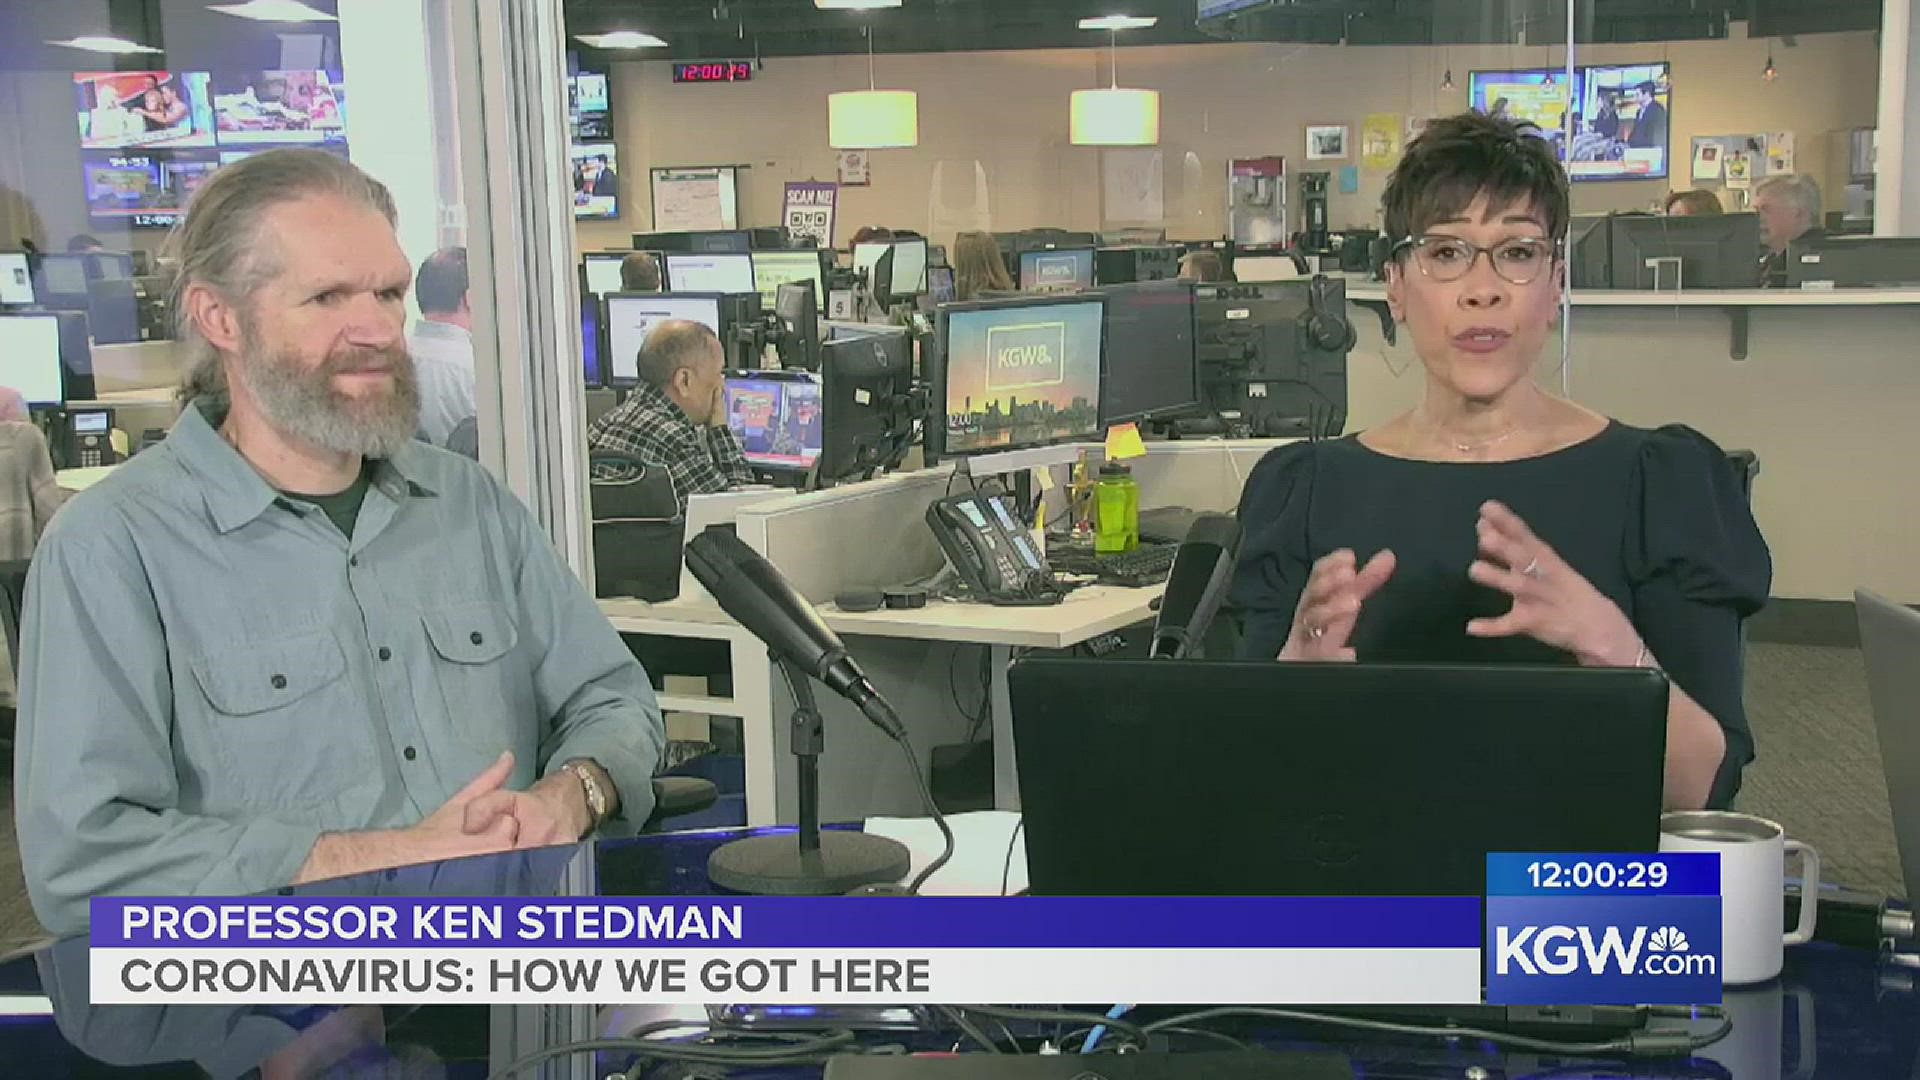 Answering more of your coronavirus questions KGW anchor Brenda Braxton had a 25-minute interview with Ken Stedman, a biology professor at Portland State University,